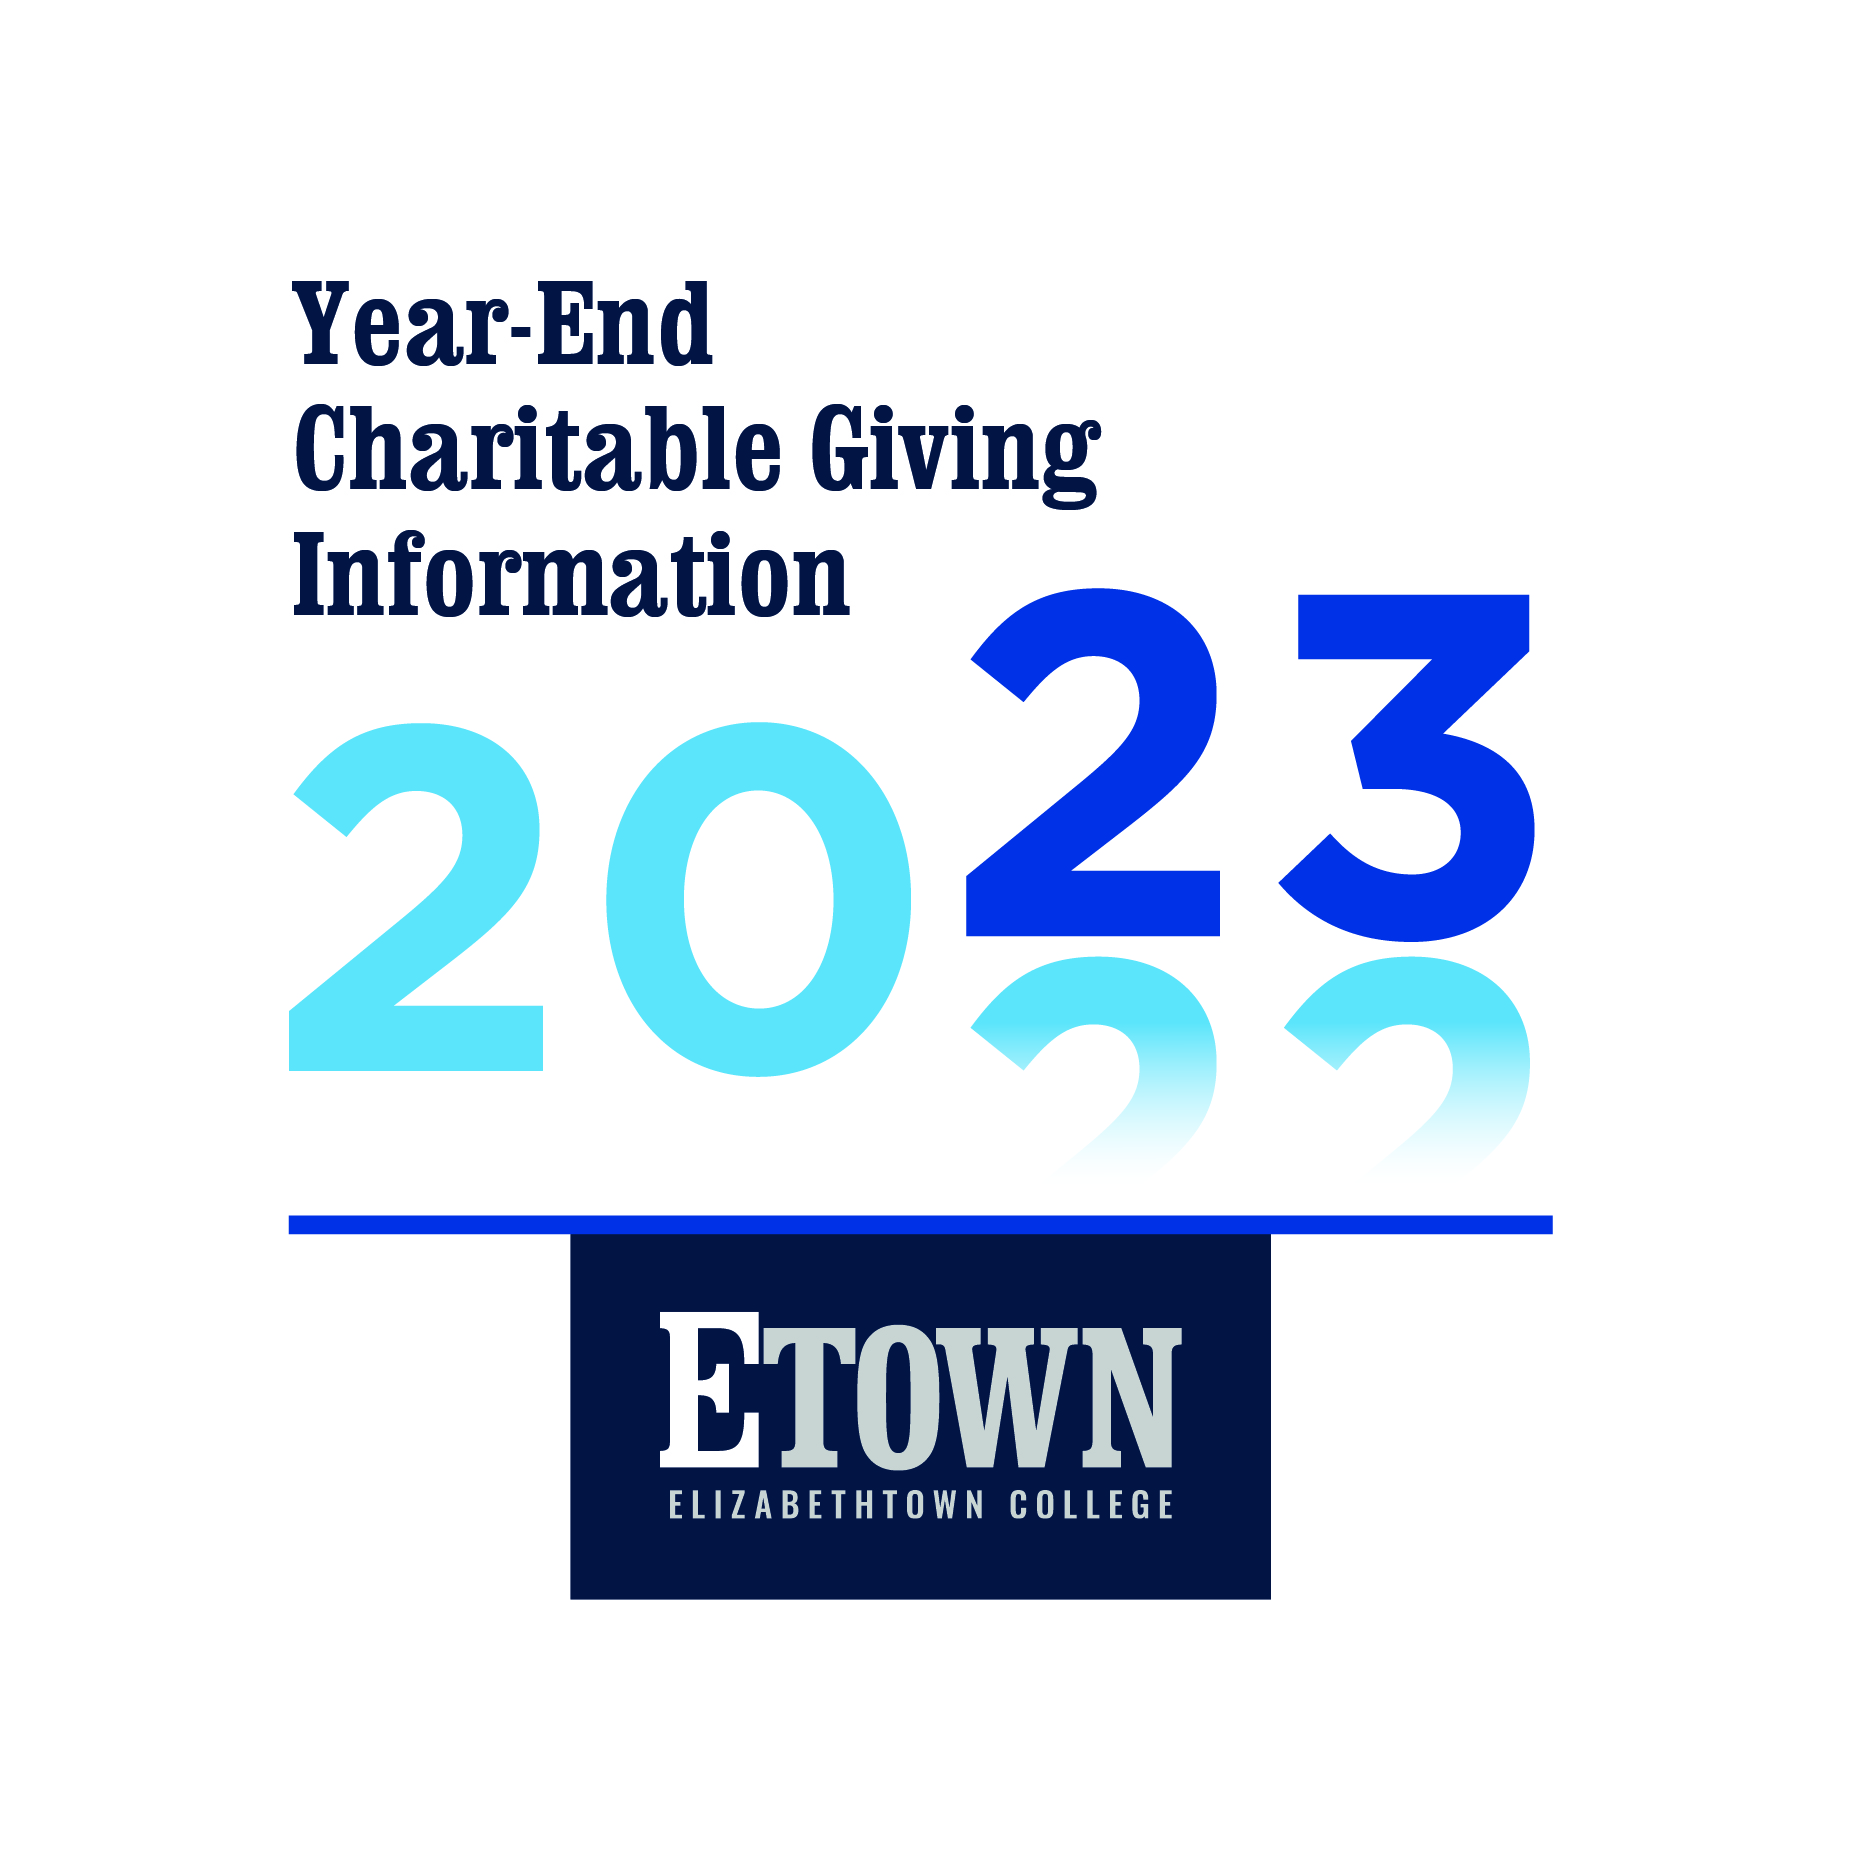 Year-End Charitable Giving Information